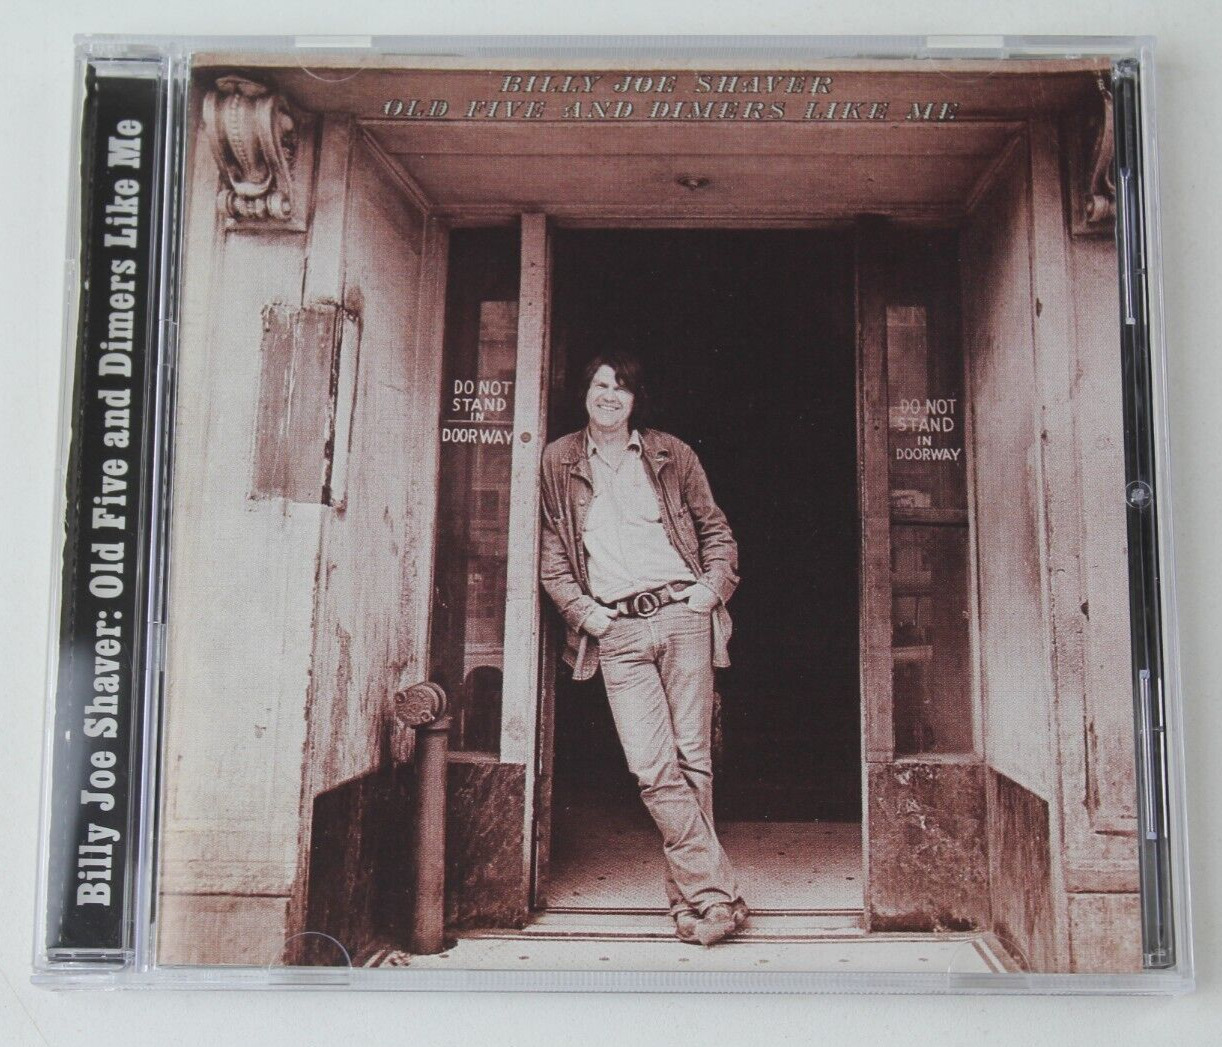 Old Five and Dimers Like Me by Billy Joe Shaver (CD, 1996)